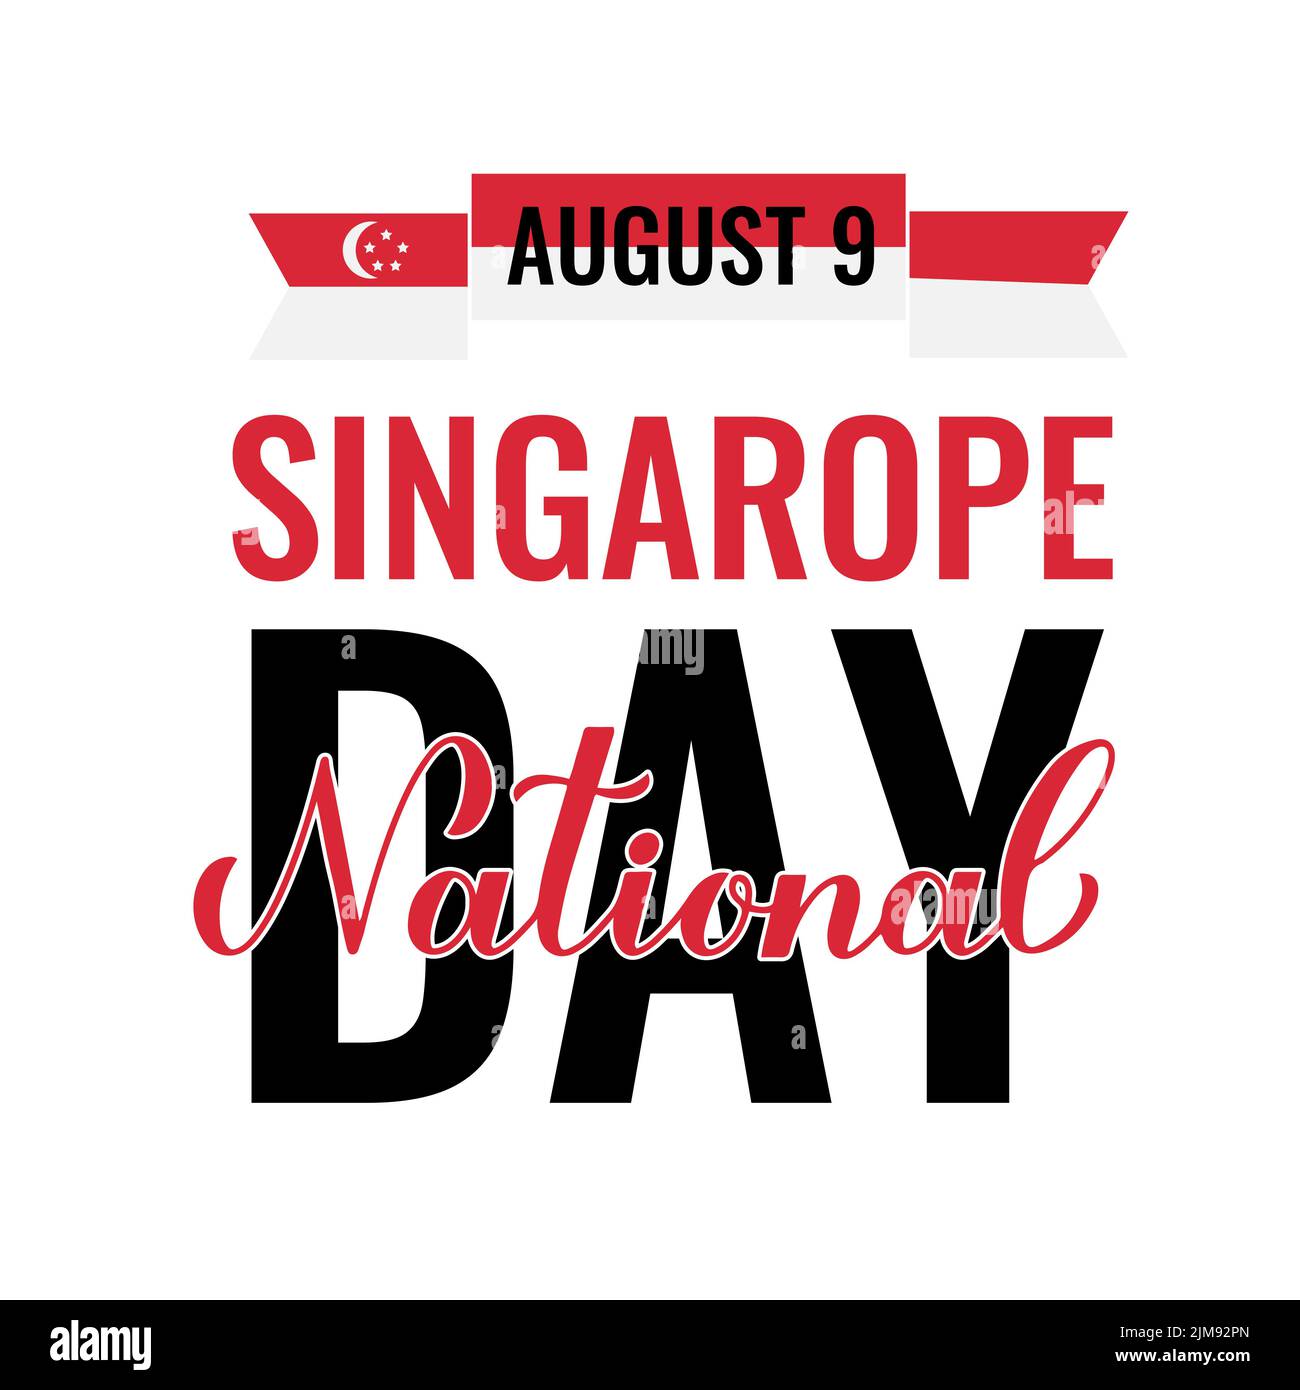 Singapore National Day typography poster. Singapore Vector template for banner, sticker, flyer, postcard, etc. Stock Vector